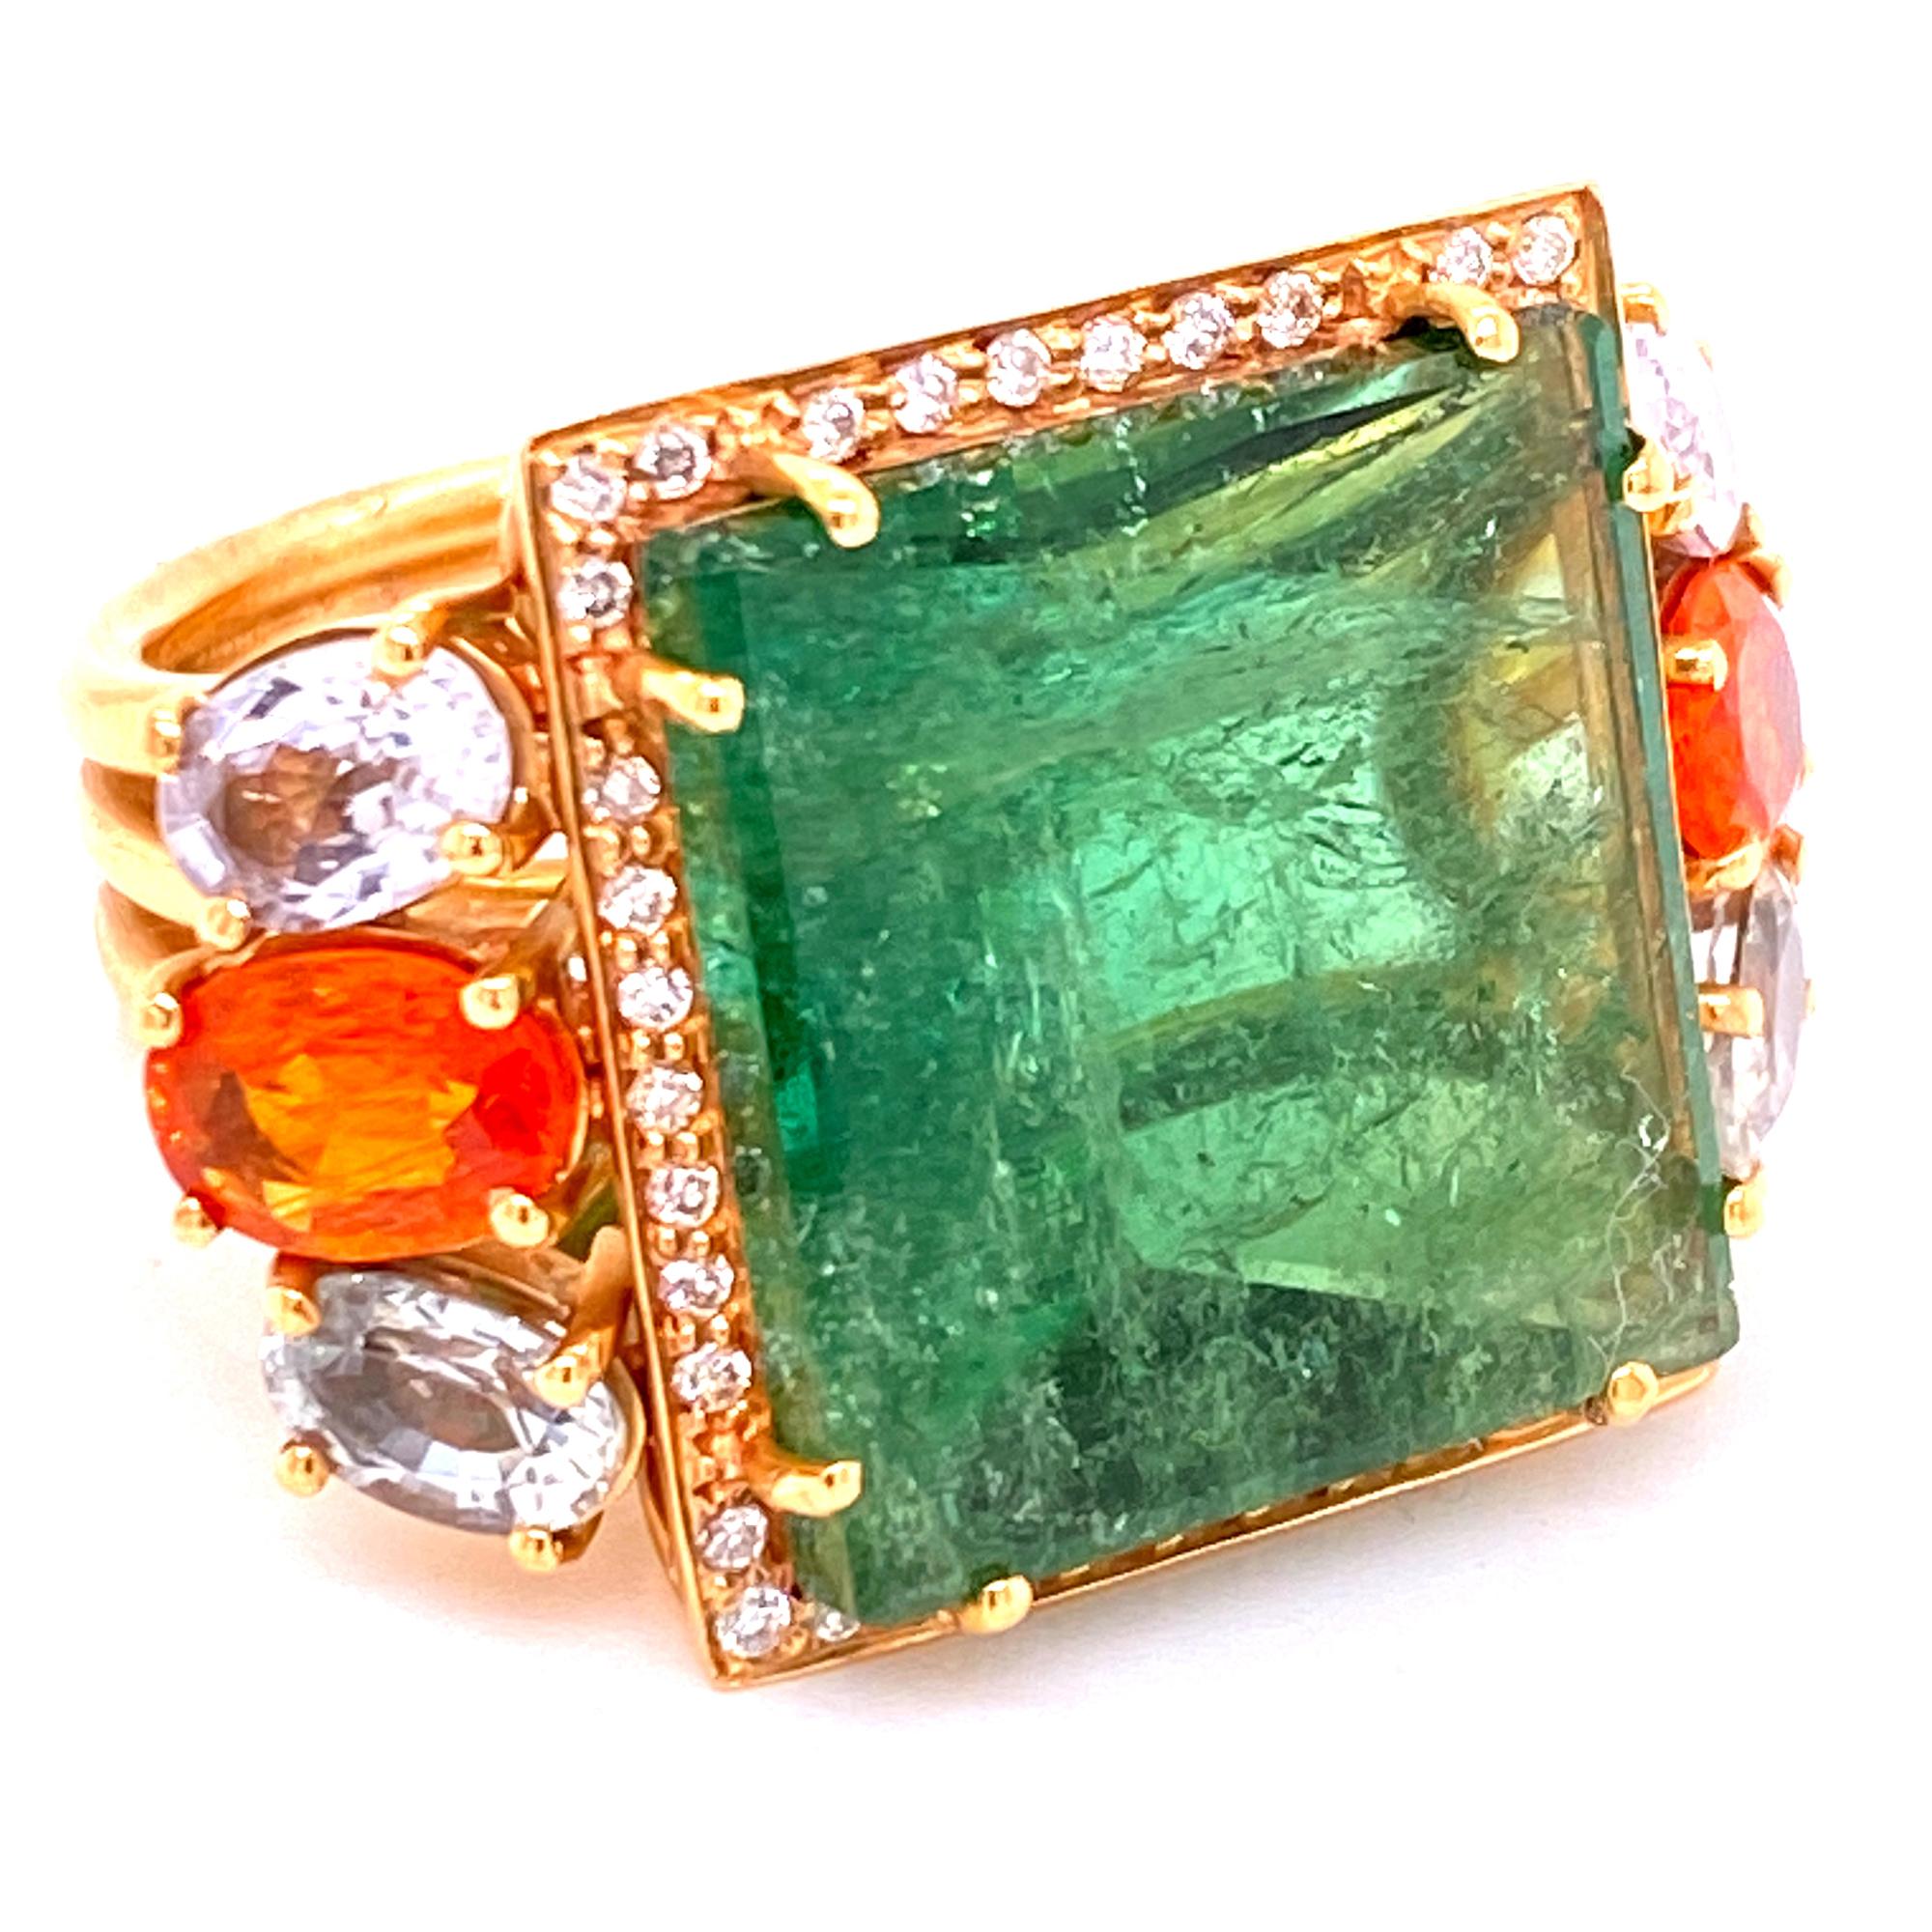 Fabulous square green tourmaline, fire opal, sapphire, and diamond ring fashioned in 18 karat yellow gold. The square cut 22 carat green tourmaline gemstone is surrounded by 38 round brilliant cut diamonds( .38 ctw). The mounting also features two